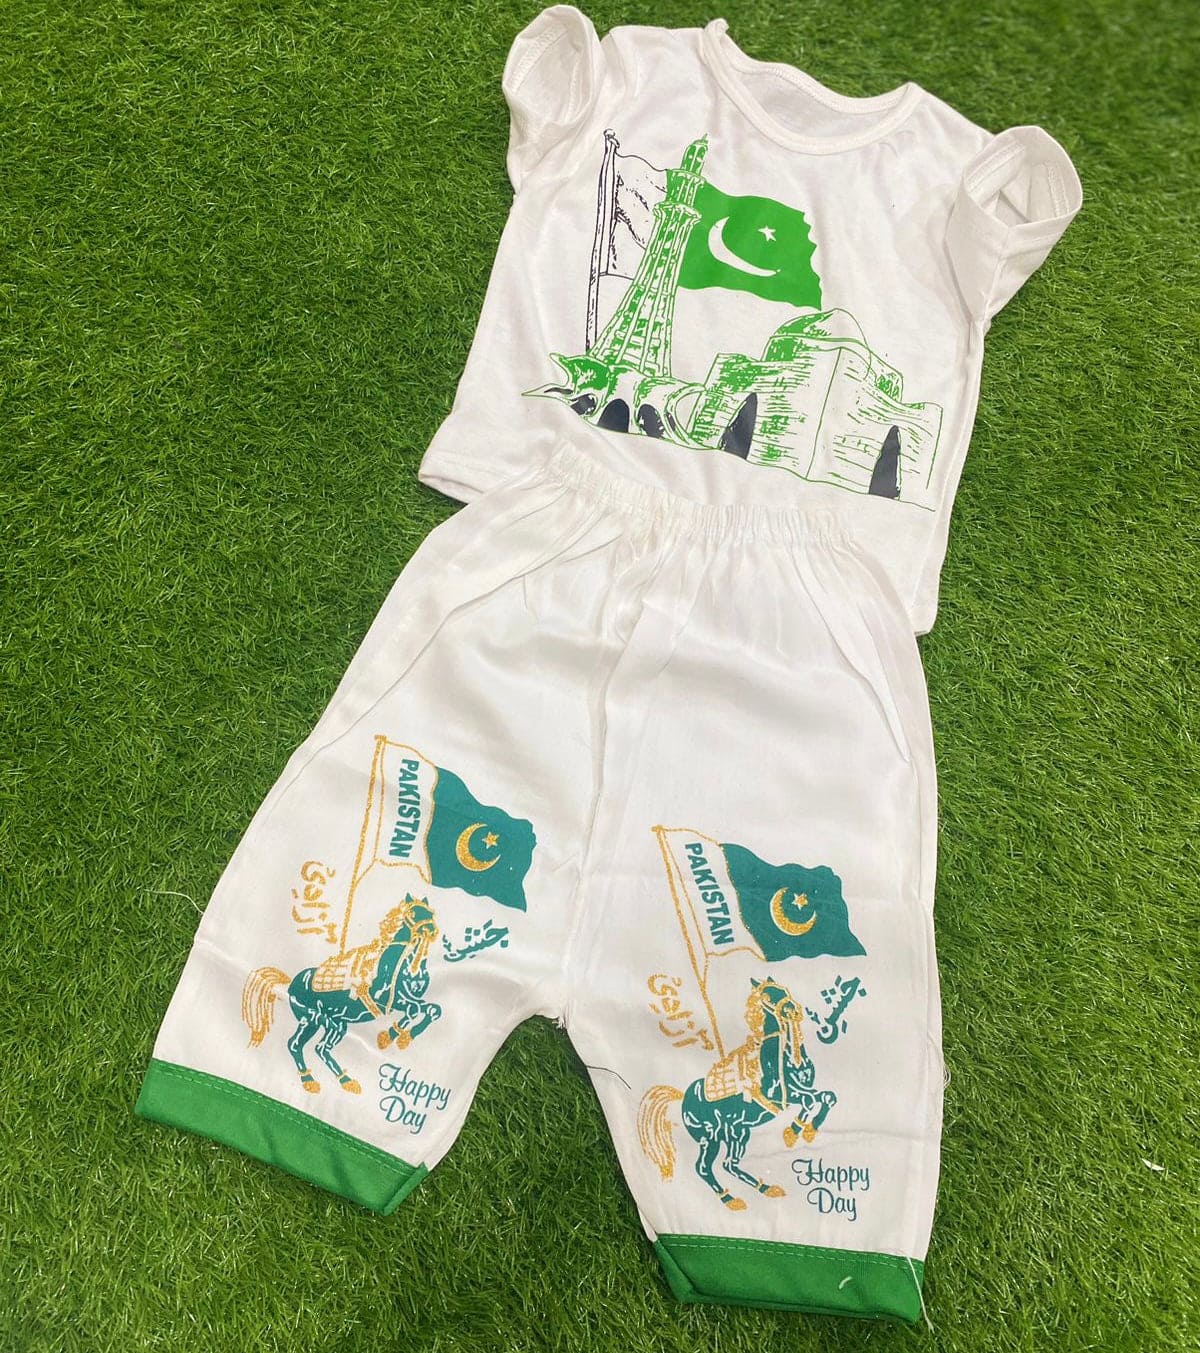 Independence Day Kids Suit, 14 August Kid Suit, Independence Day Kid Dress